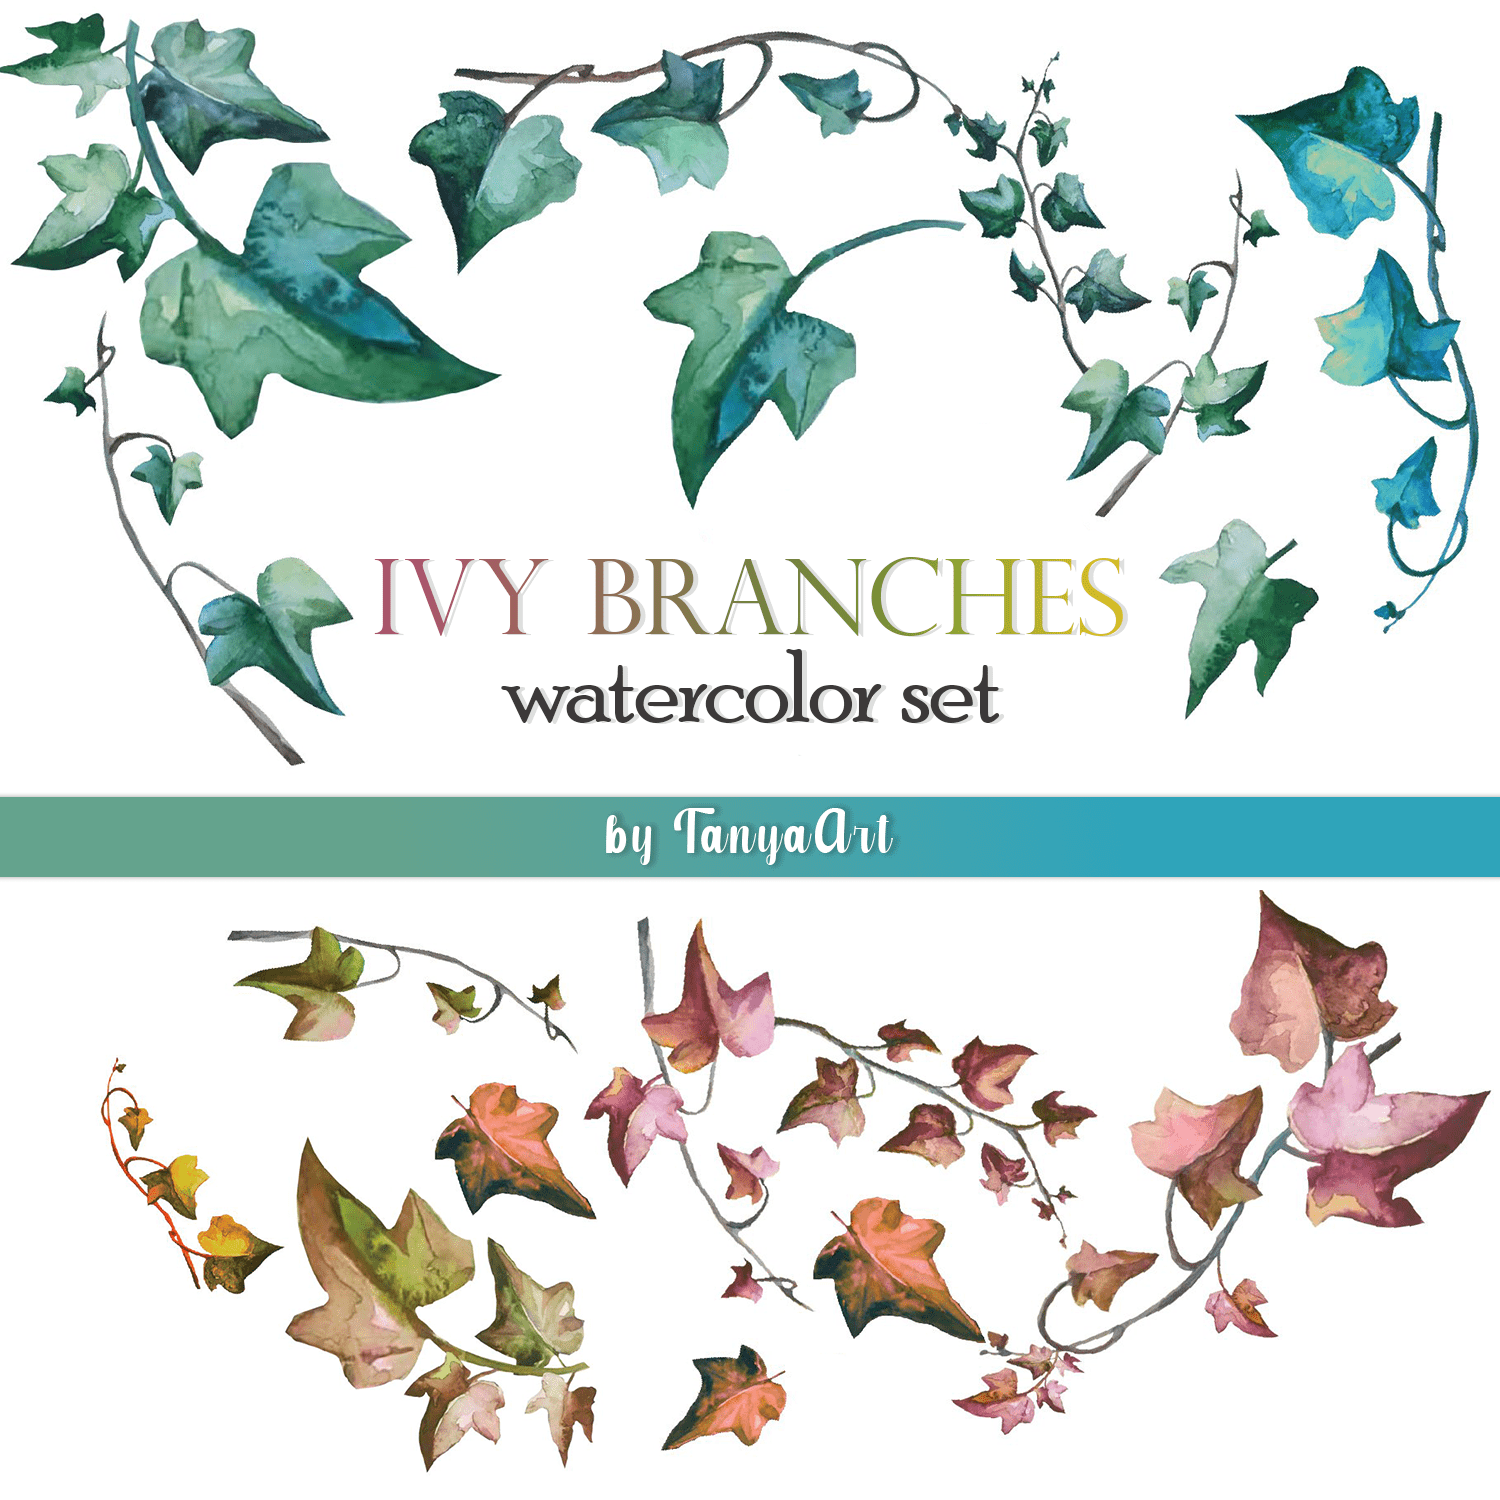 ivy branches watercolor set.